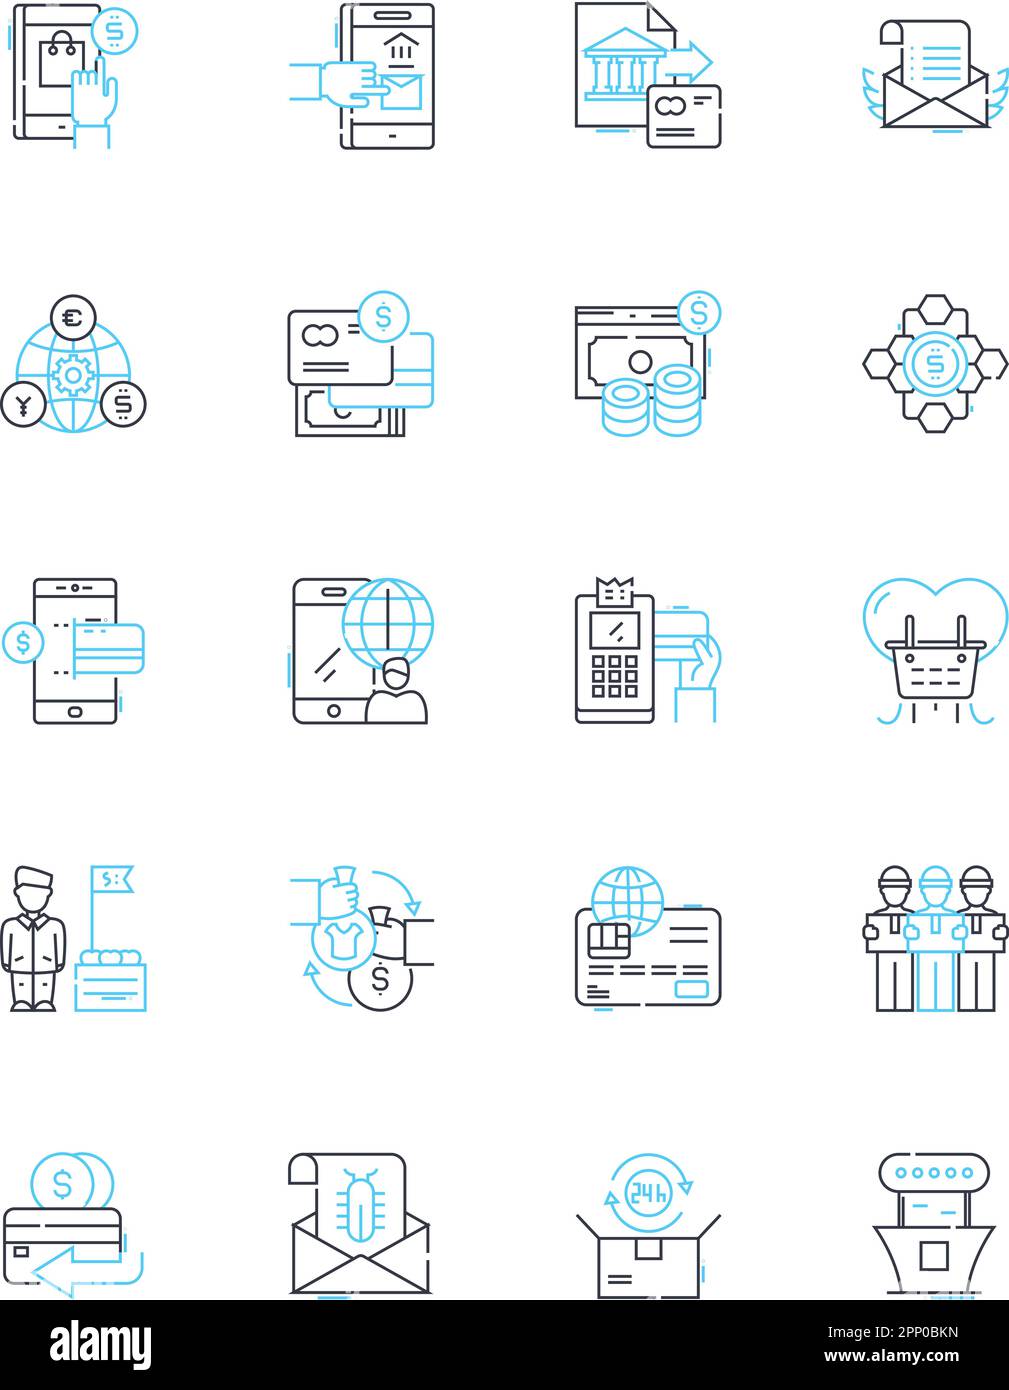 Supply chain linear icons set. Logistics, Distribution, Transportation, Procurement, Inventory, Manufacturing, Warehousing line vector and concept Stock Vector